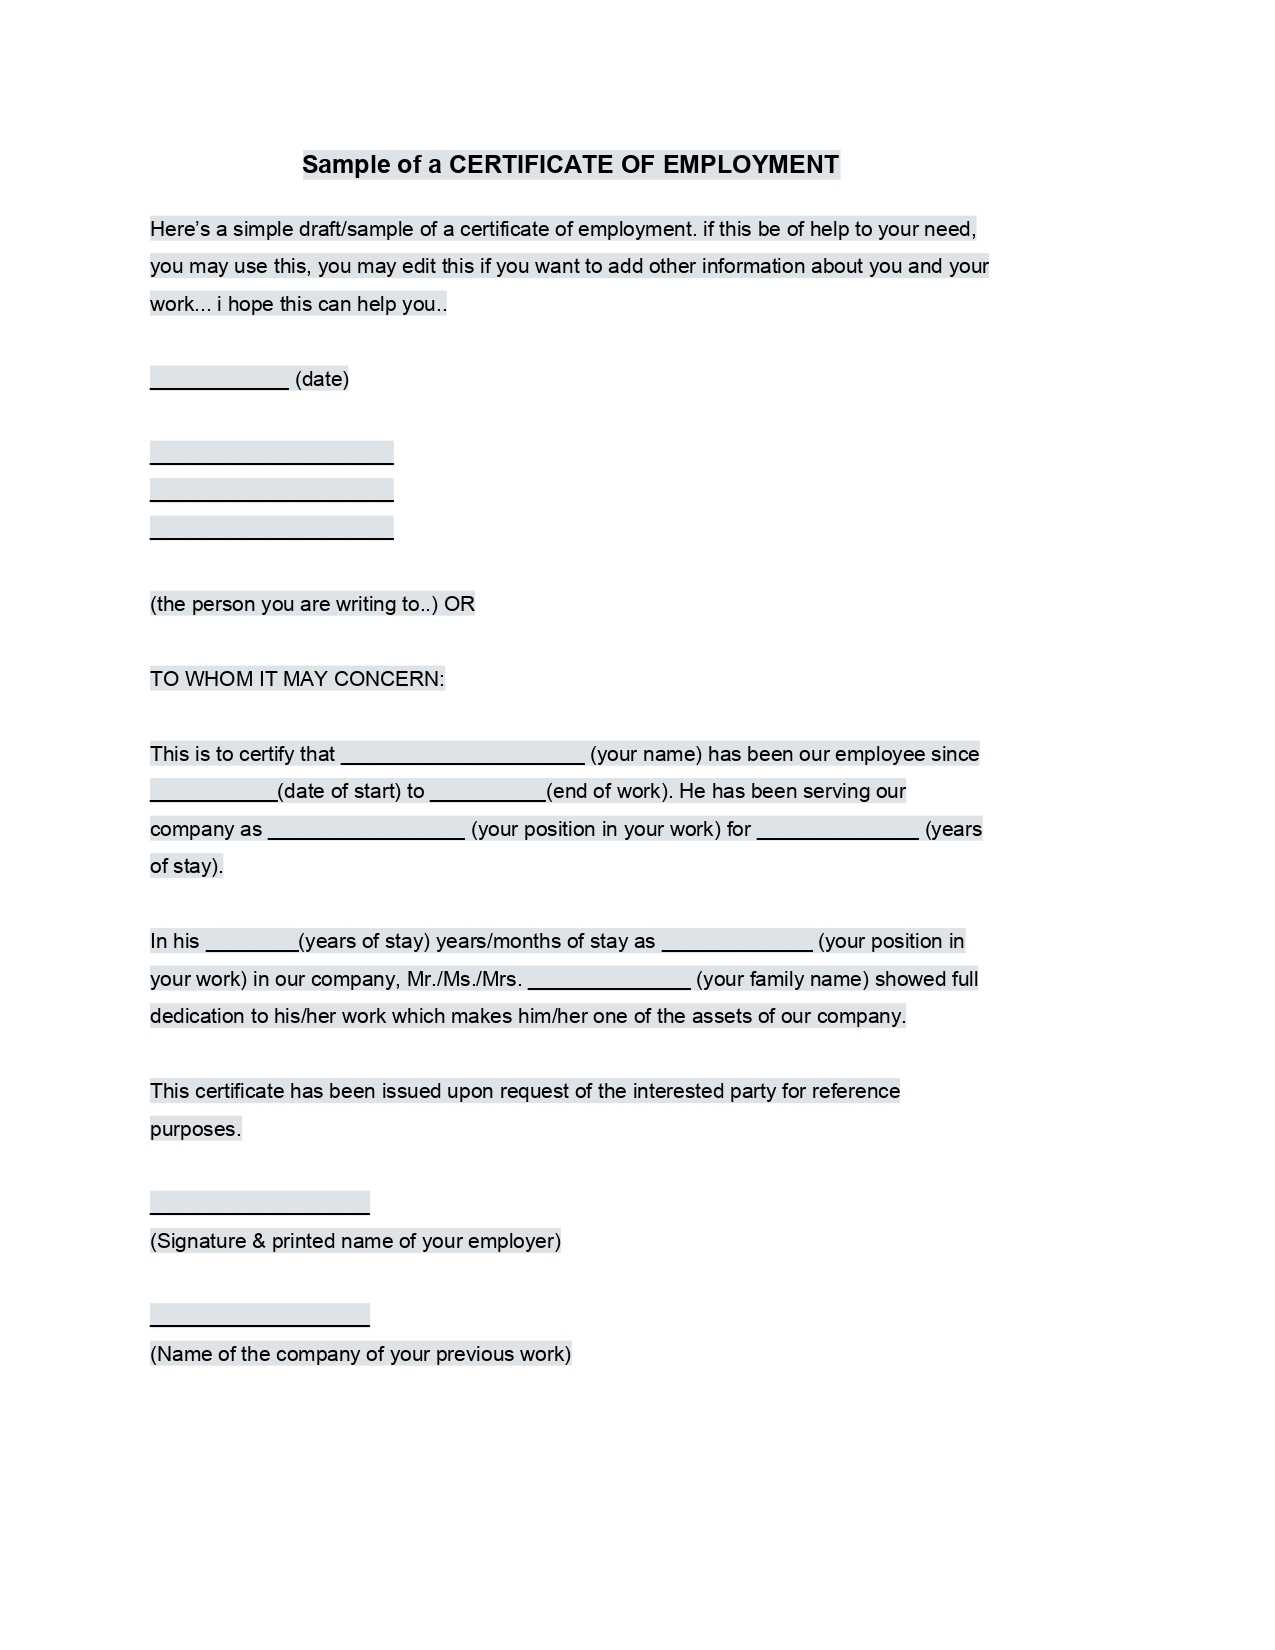 Sample Employment Certificate From Employer – Google Docs Within Template Of Certificate Of Employment